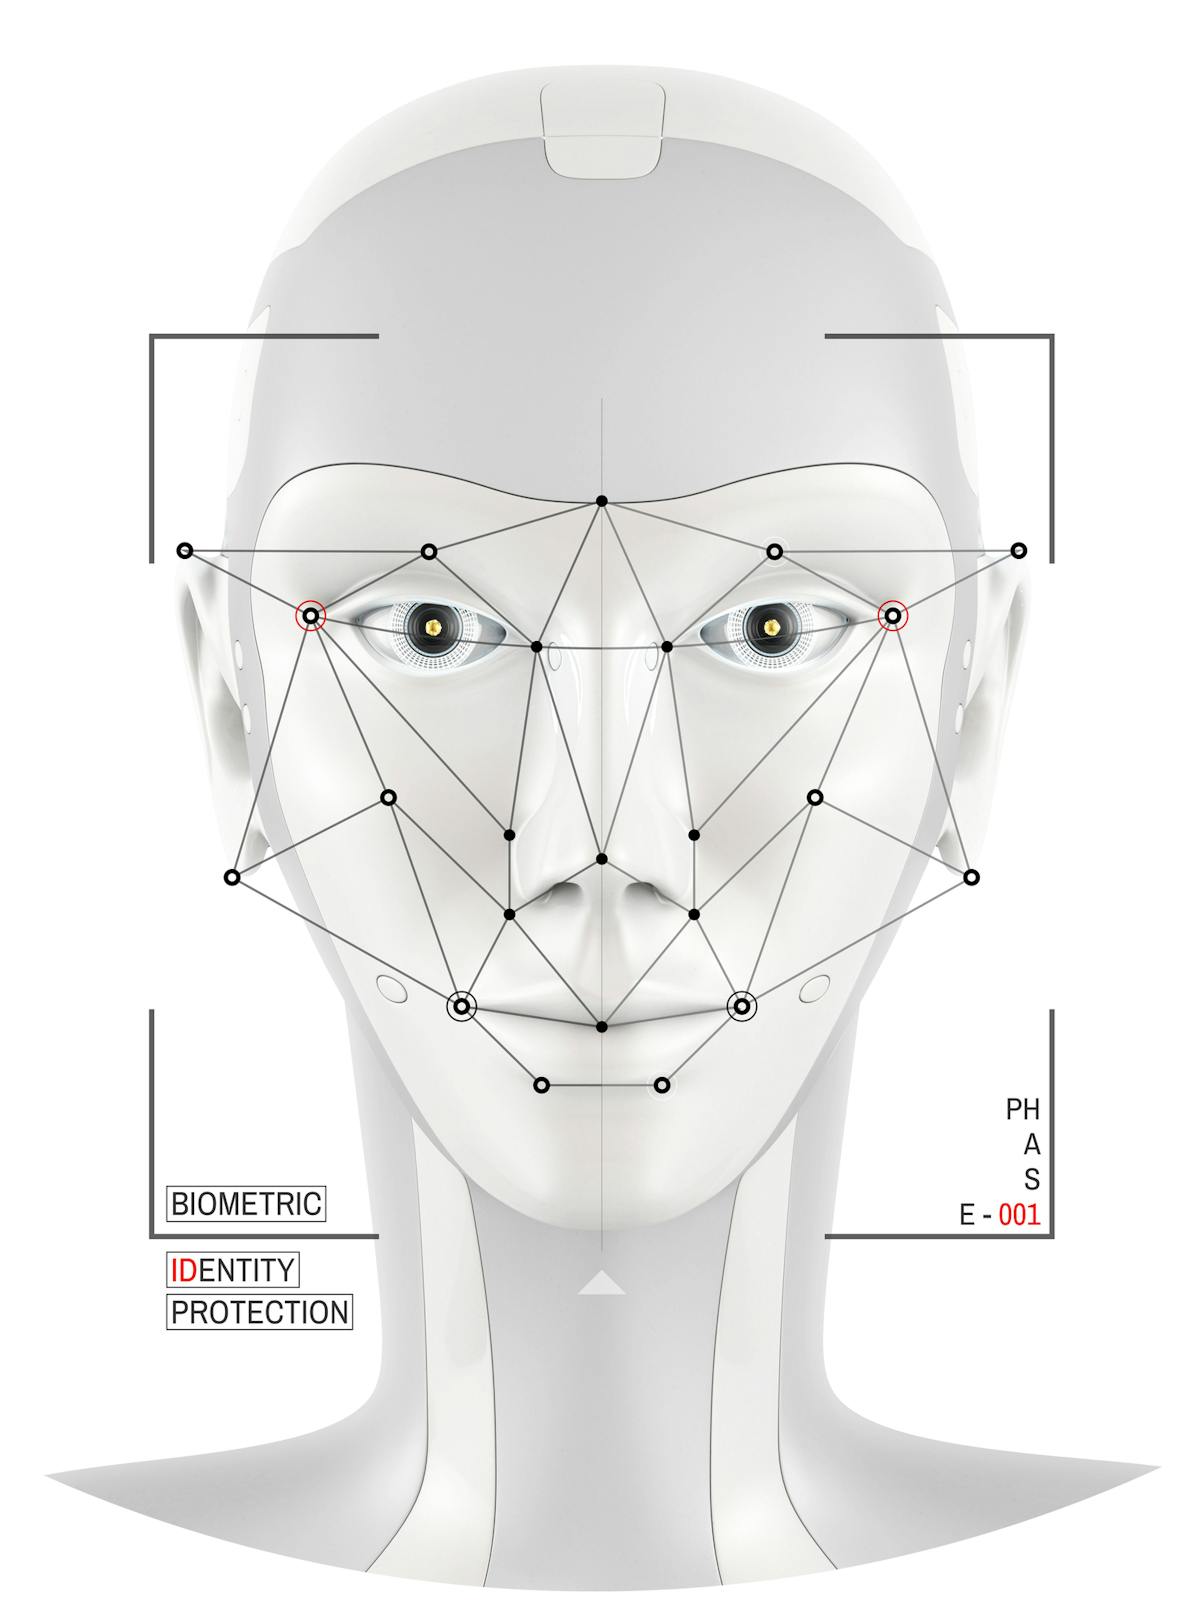 Advancements in the intelligence of facial recognition software is paving the way for increased usage